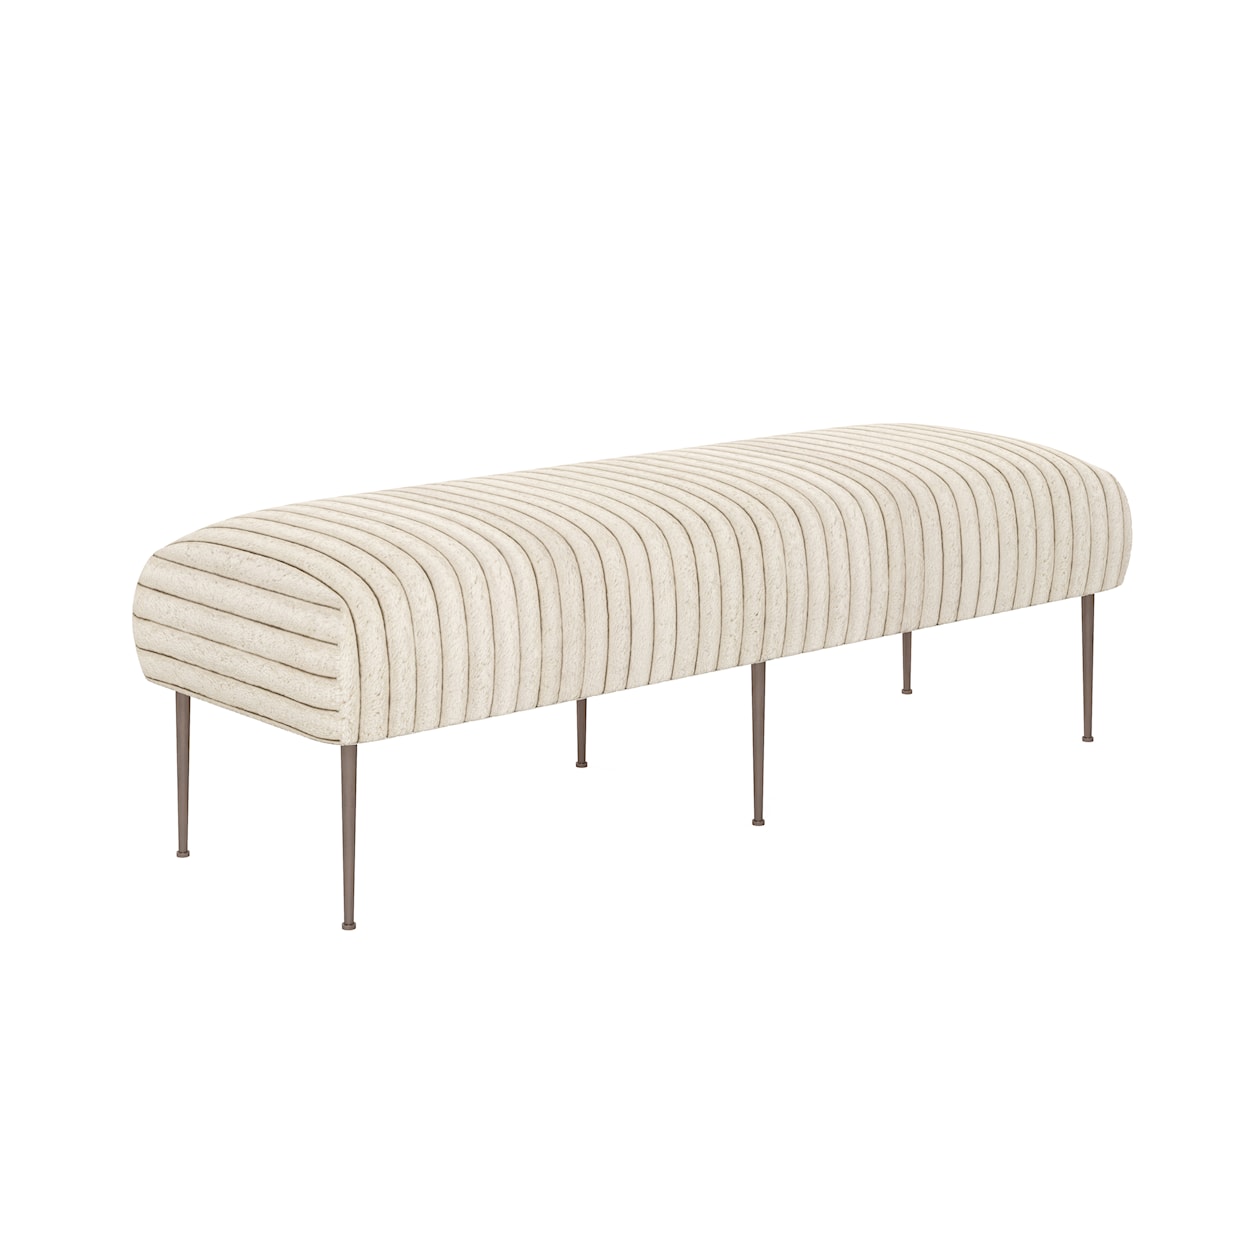 A.R.T. Furniture Inc Blanc Bench with Metal Legs